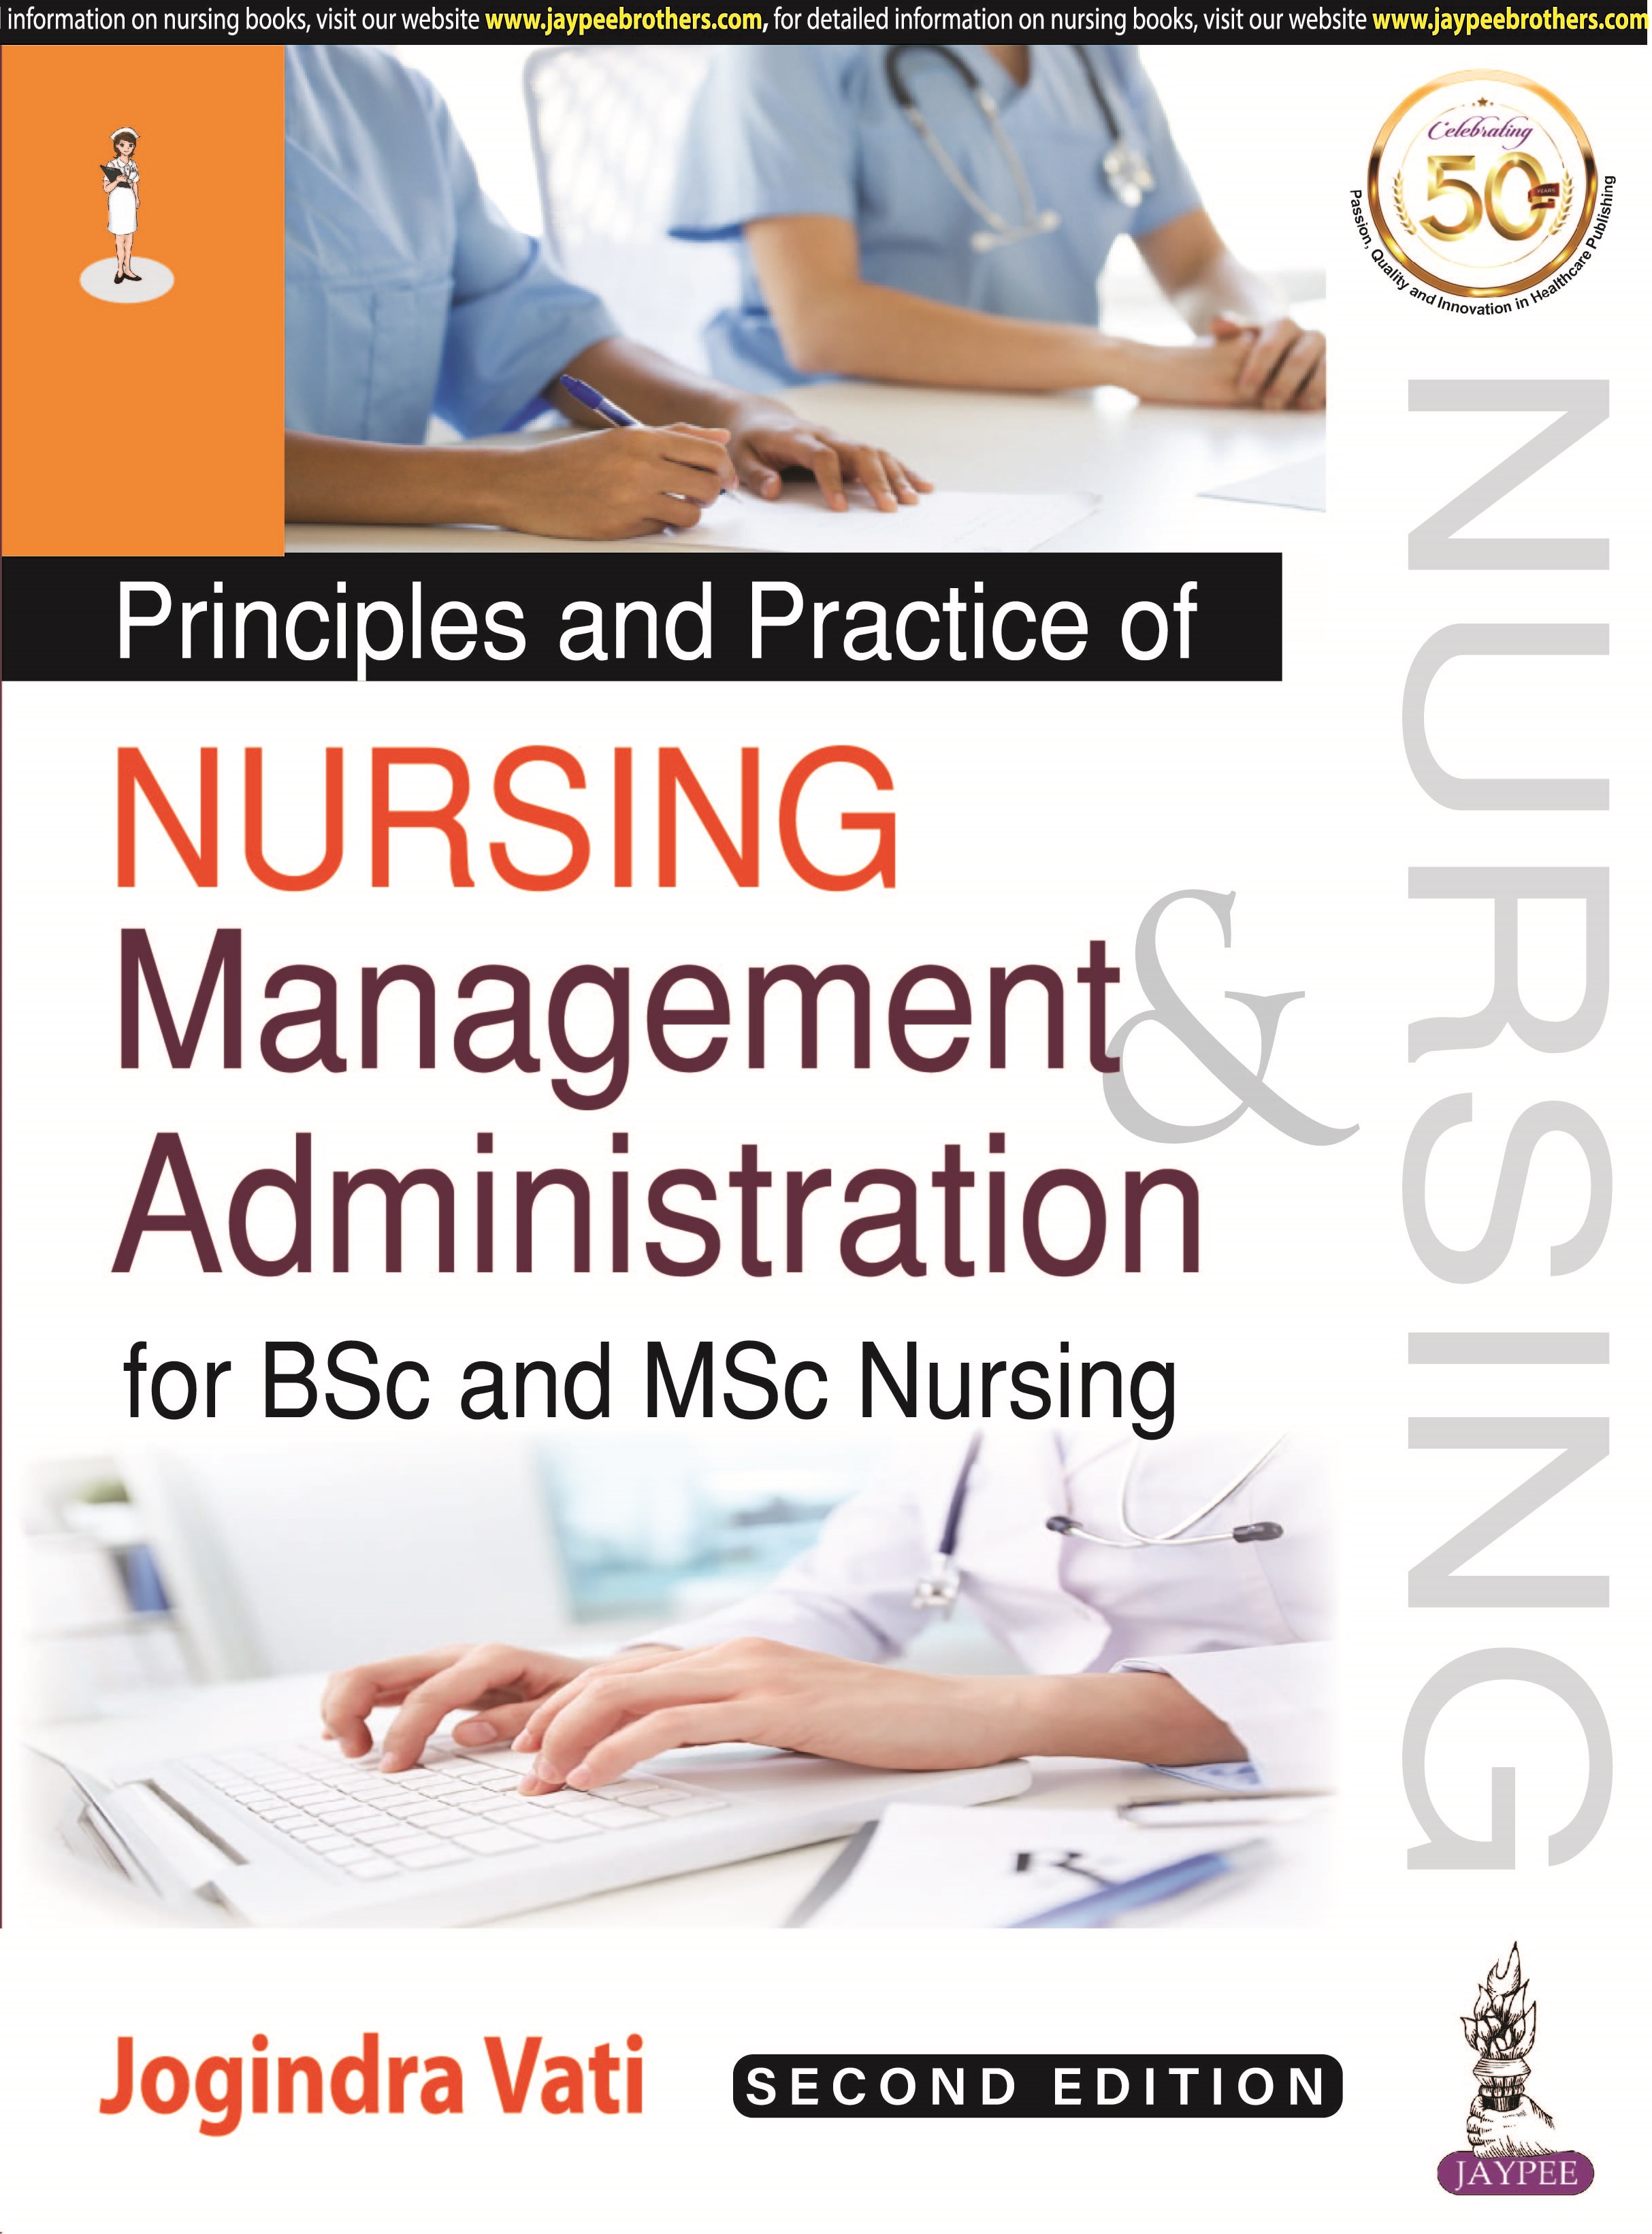 Principles And Practice Of Nursing Management And Administration For Bsc And Msc Nursing 2Ed 2020